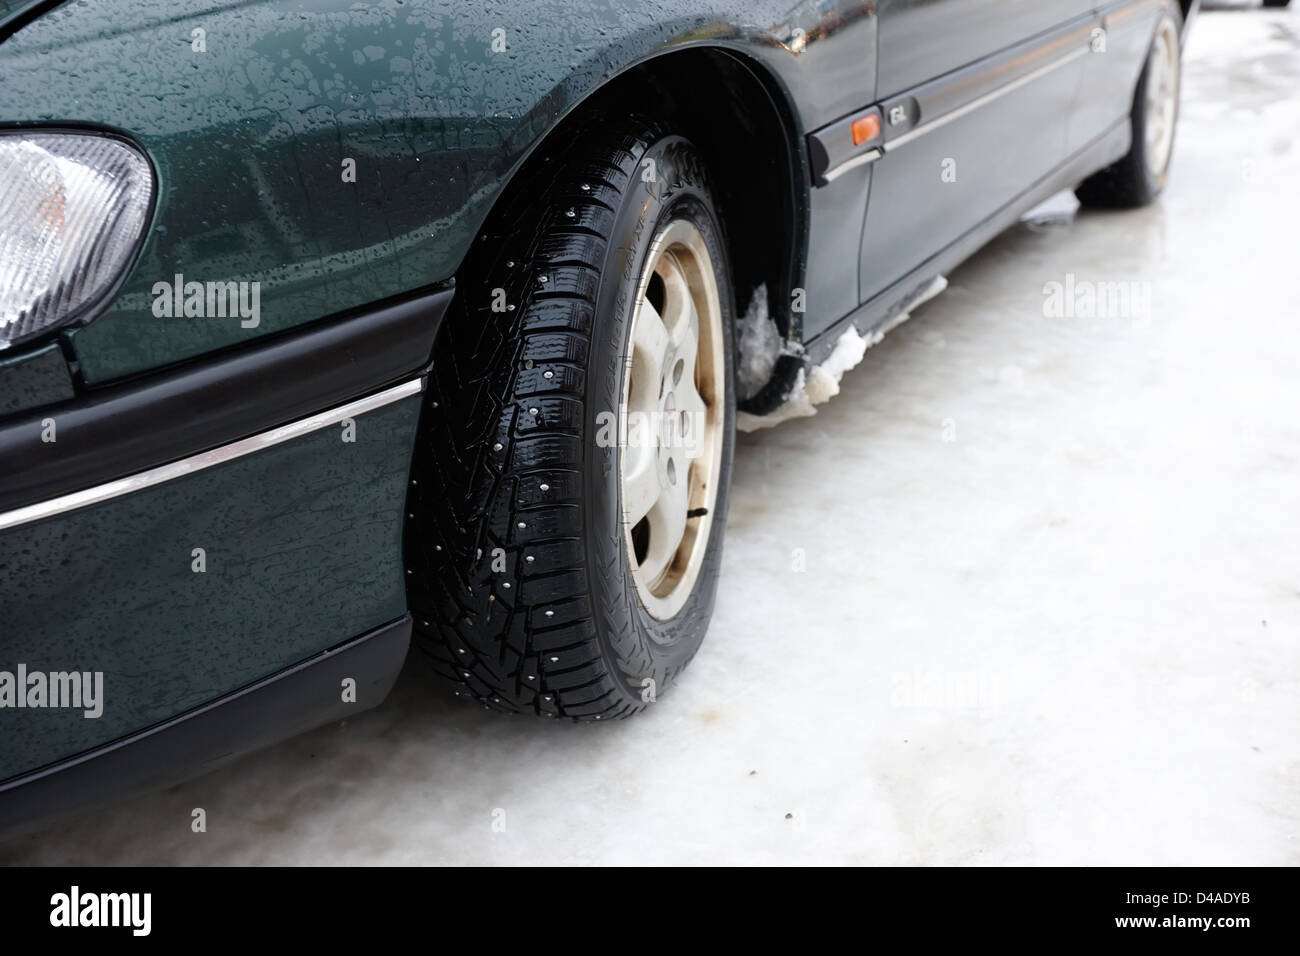 car with studded winter tyres on ice norway europe Stock Photo